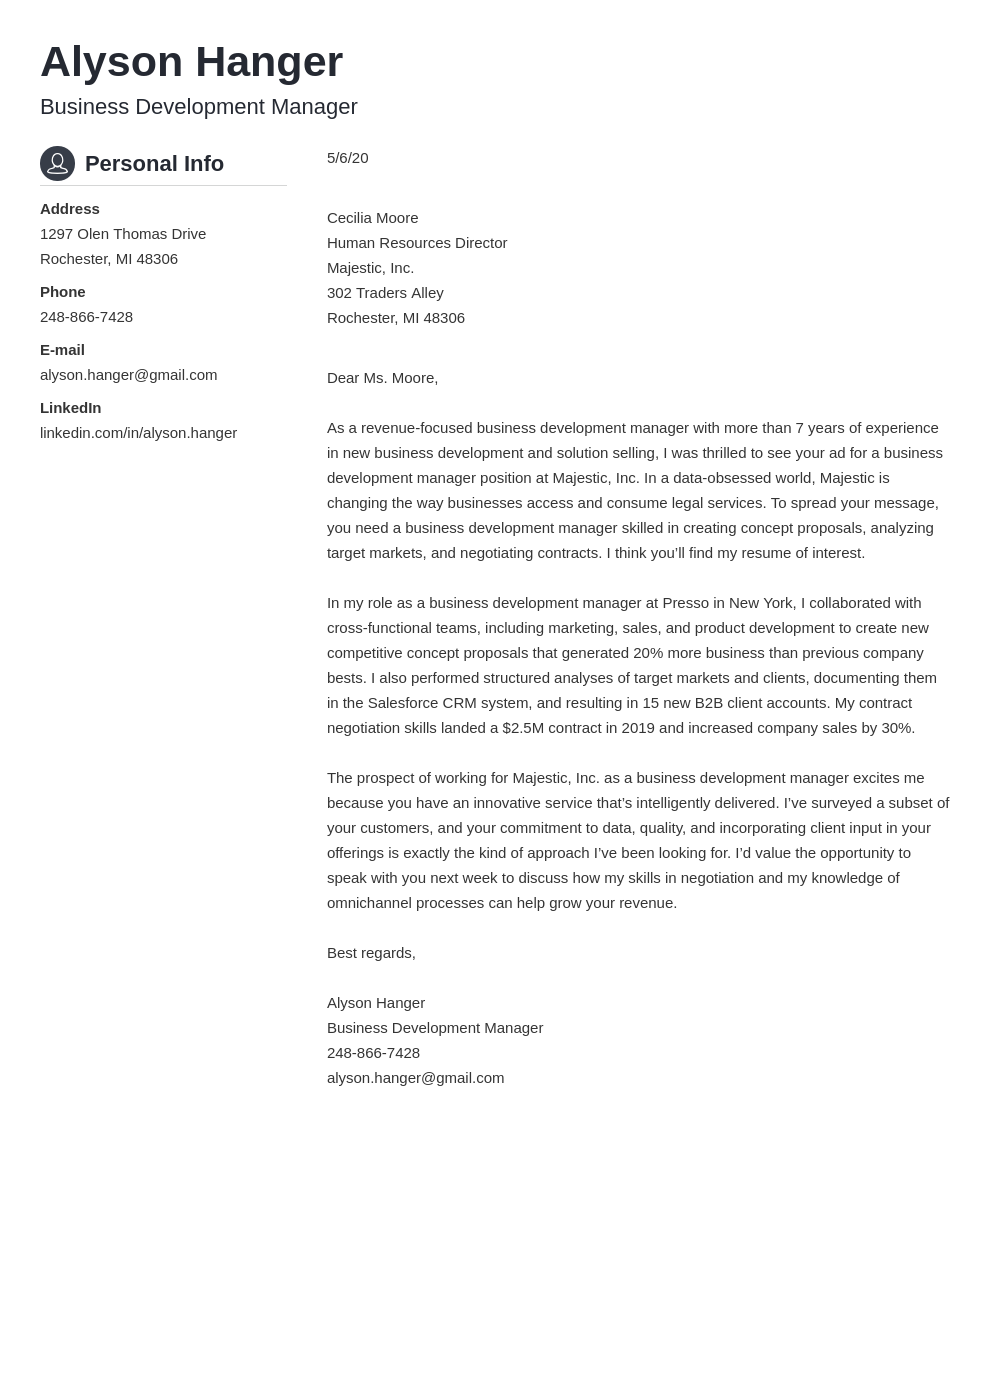 Business Development Manager Cover Letter Examples for 2021